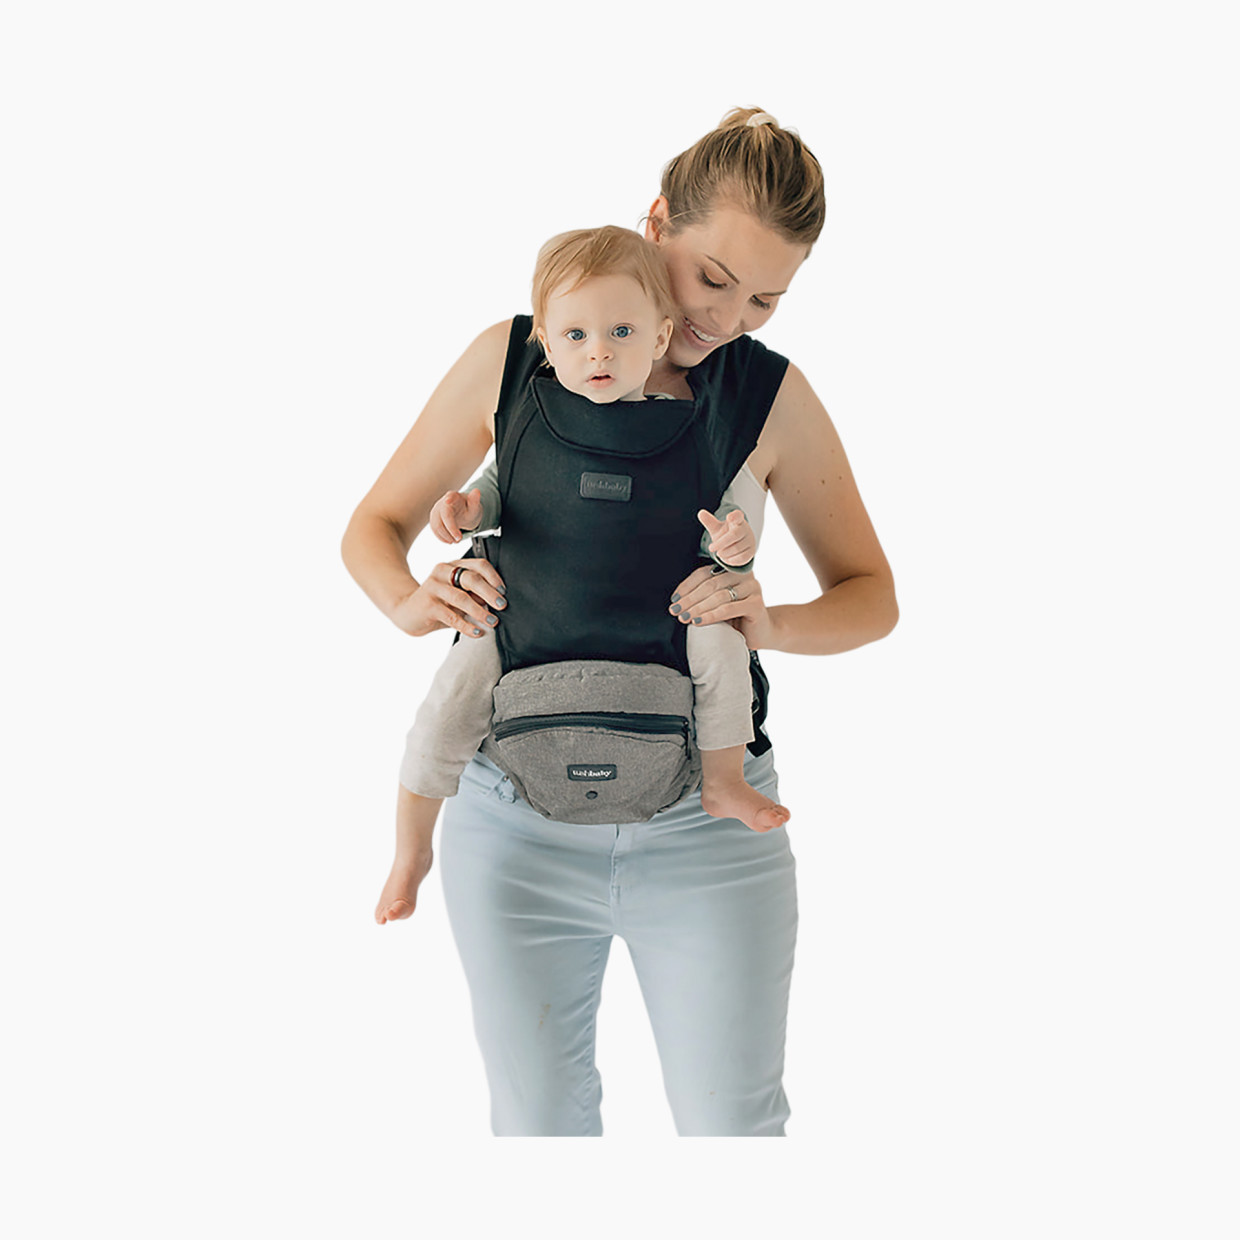 tushbaby Snug Carrier Attachment - Black.